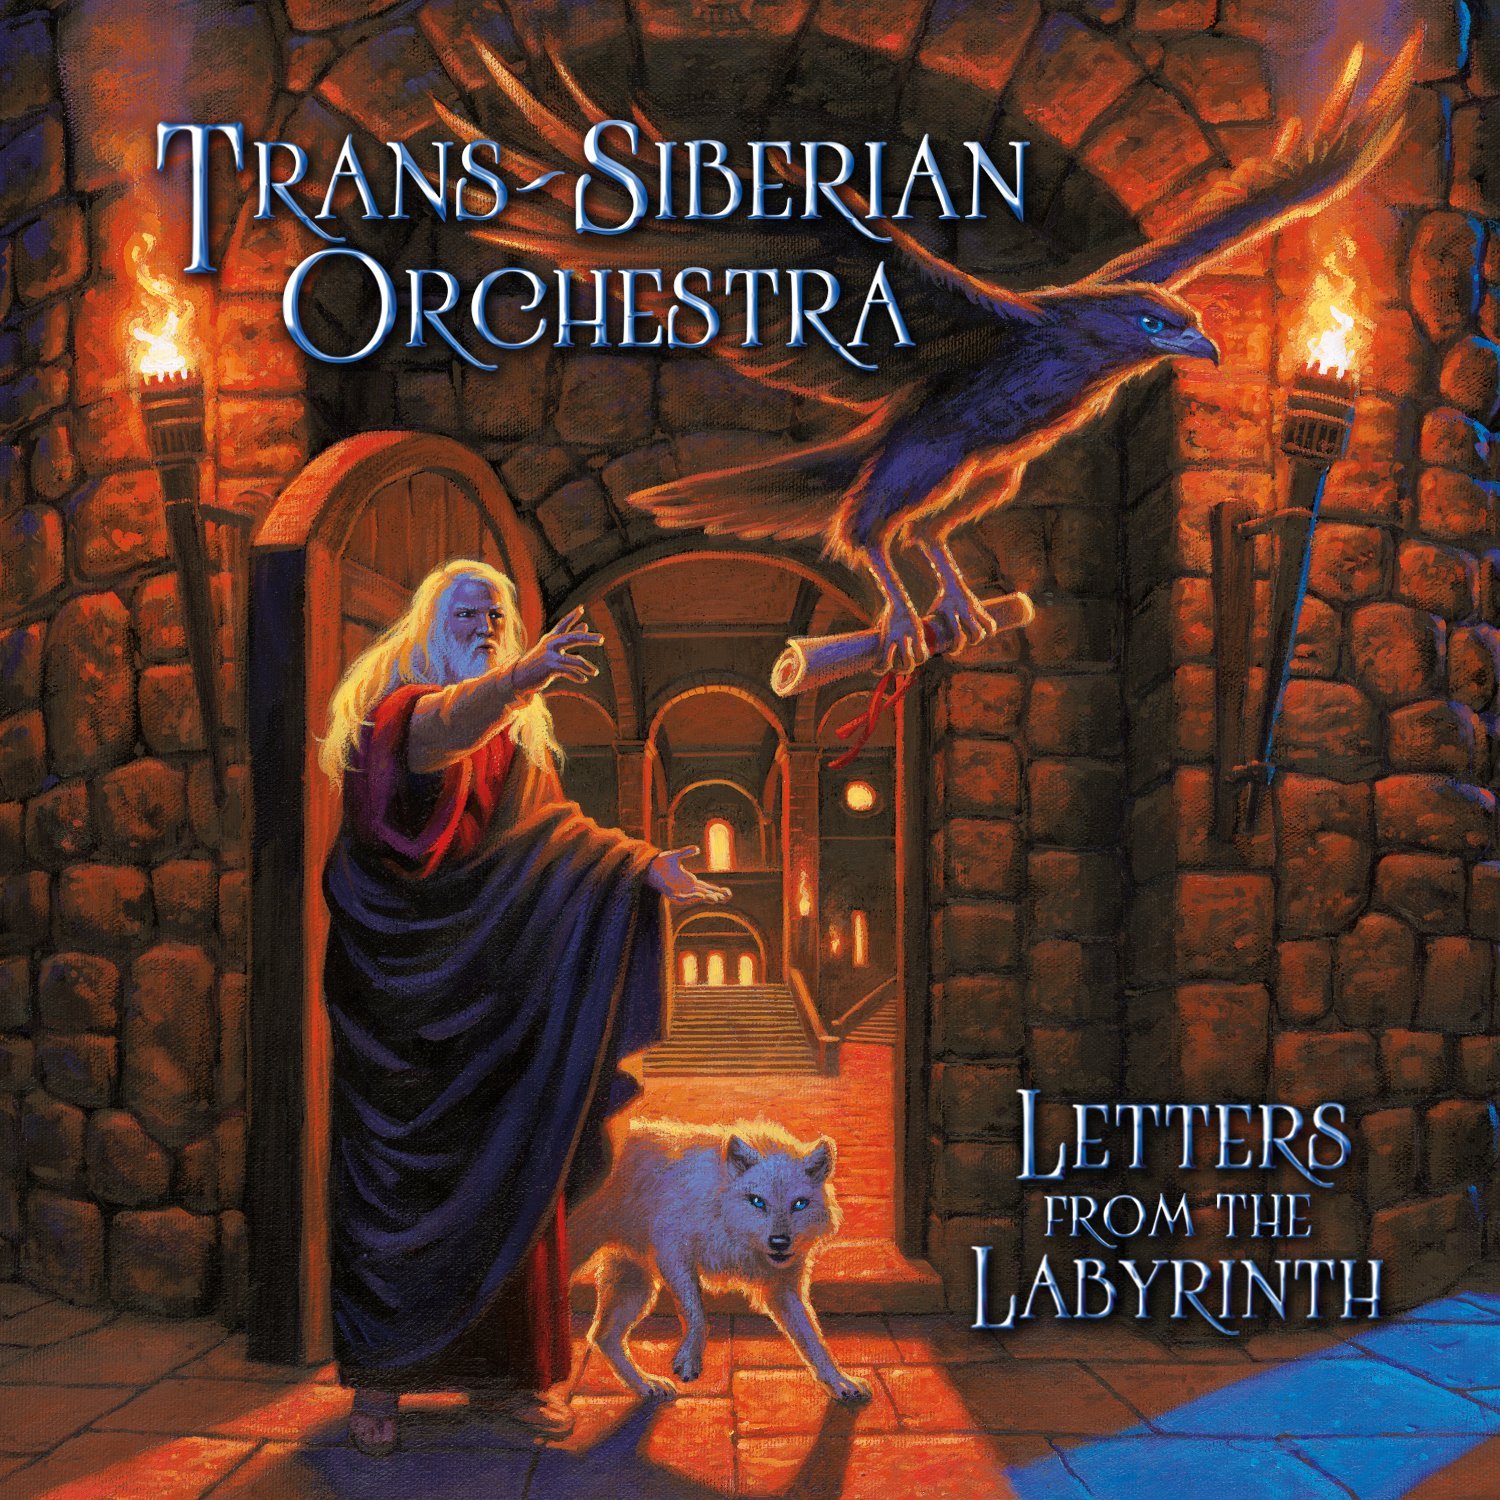 Trans-Siberian Orchestra: Letters from the Labyrinth